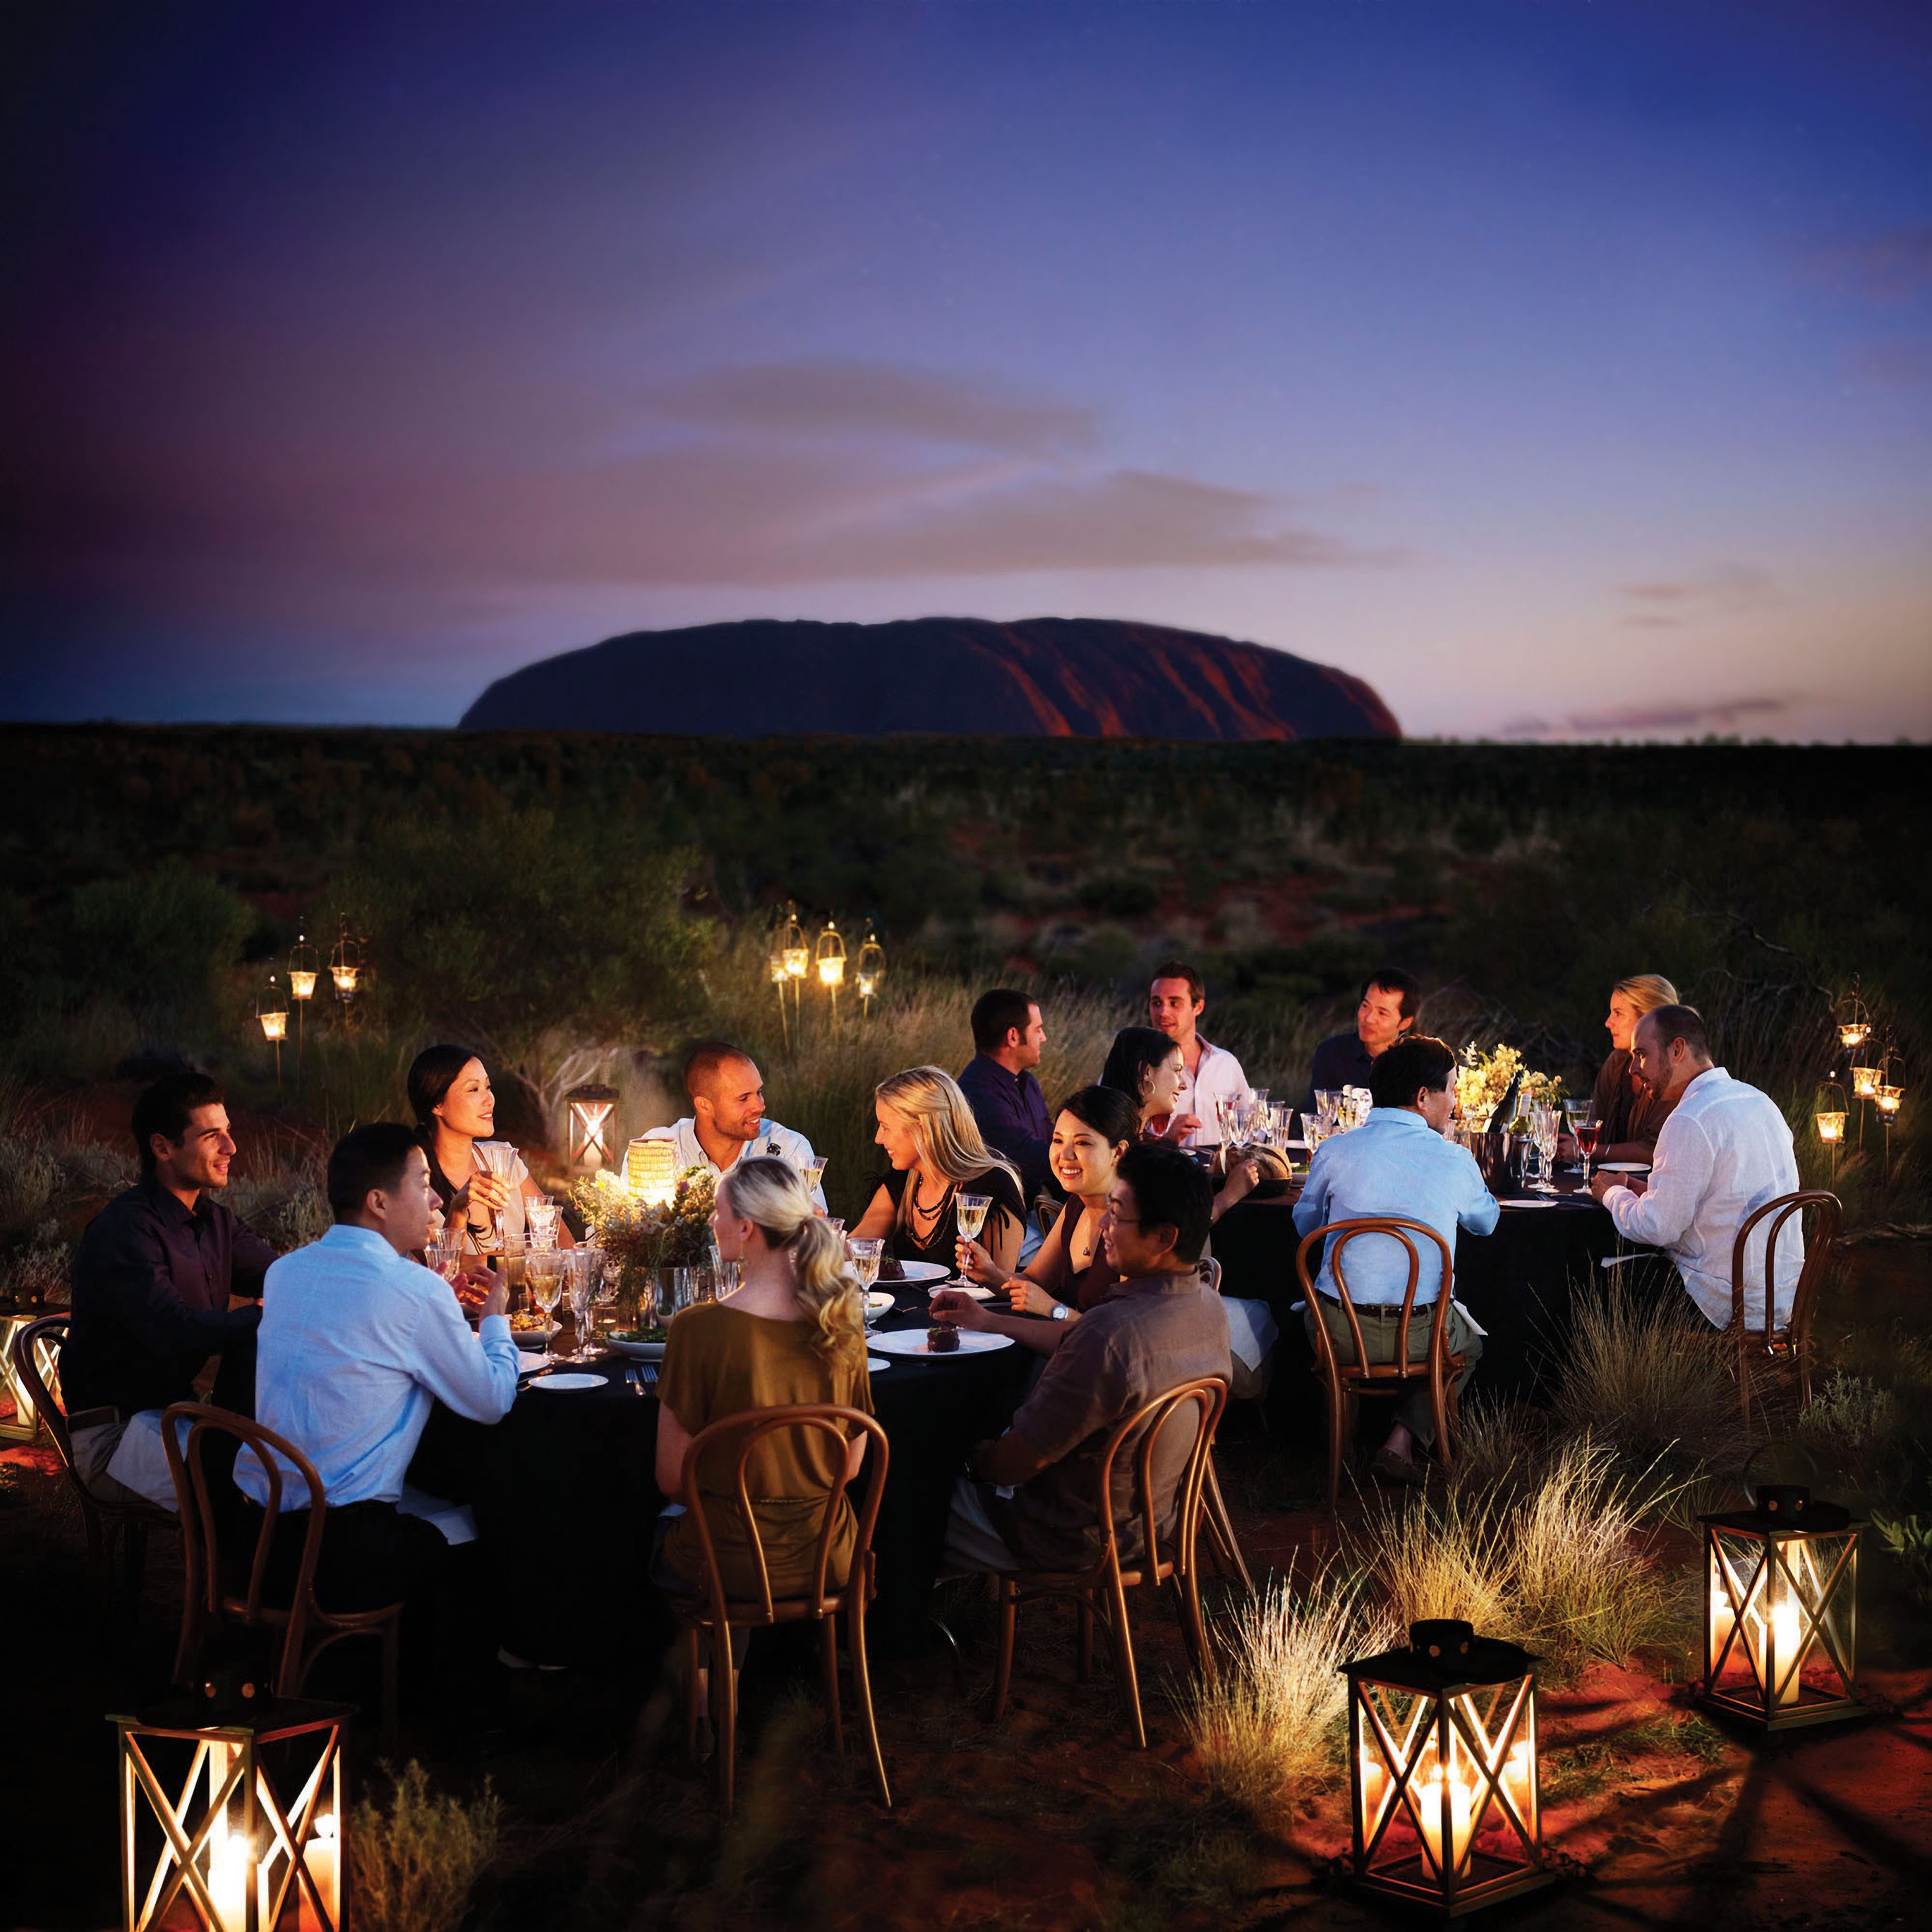 Dinner near Uluru (formerly Ayers Rock) is a popular activity for MICE groups visiting Australia.